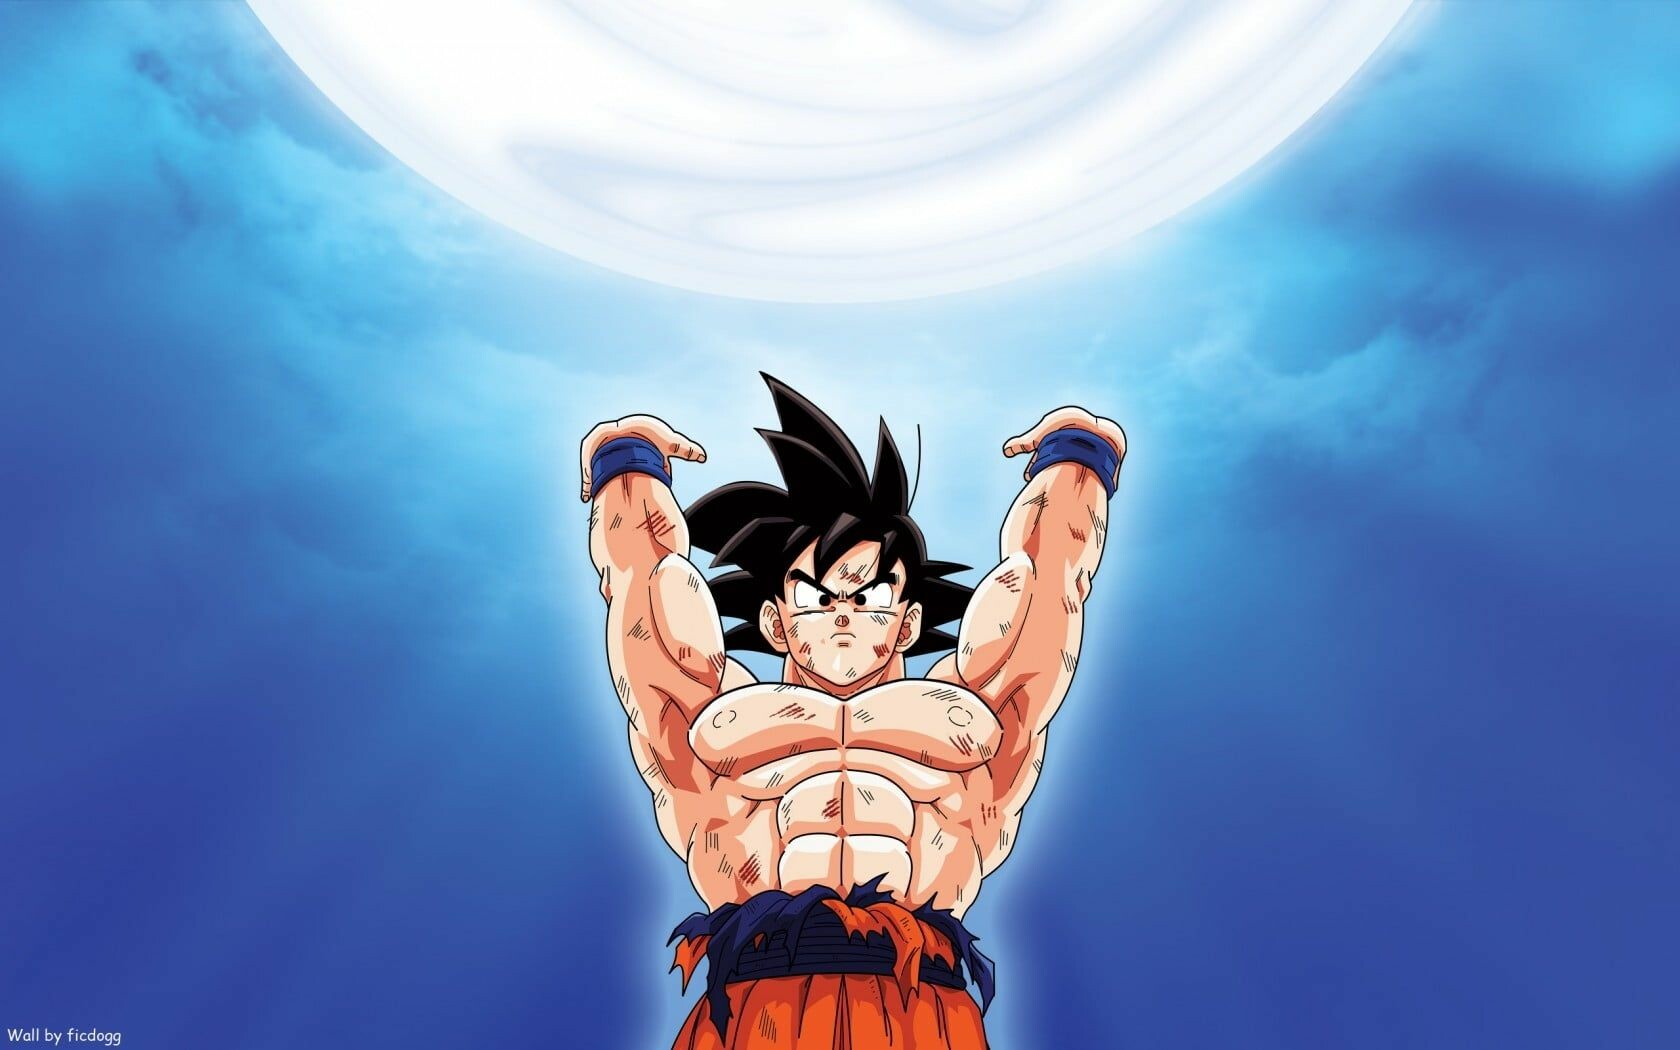 Dragon Ball iPhone Wallpaper (64+ images)